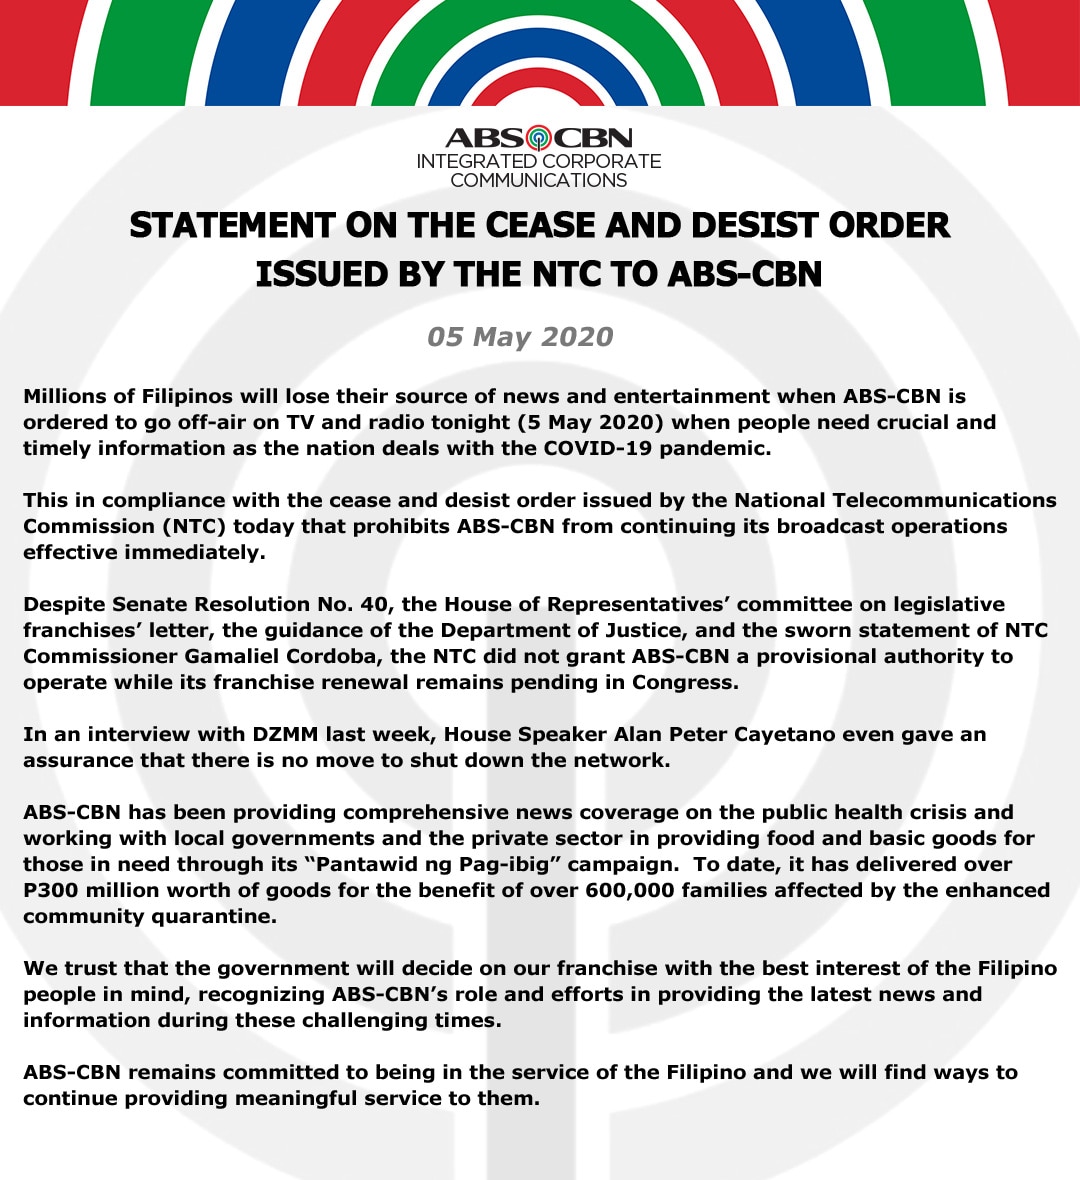 Statement on the cease and desist order issued by the NTC to ABS-CBN